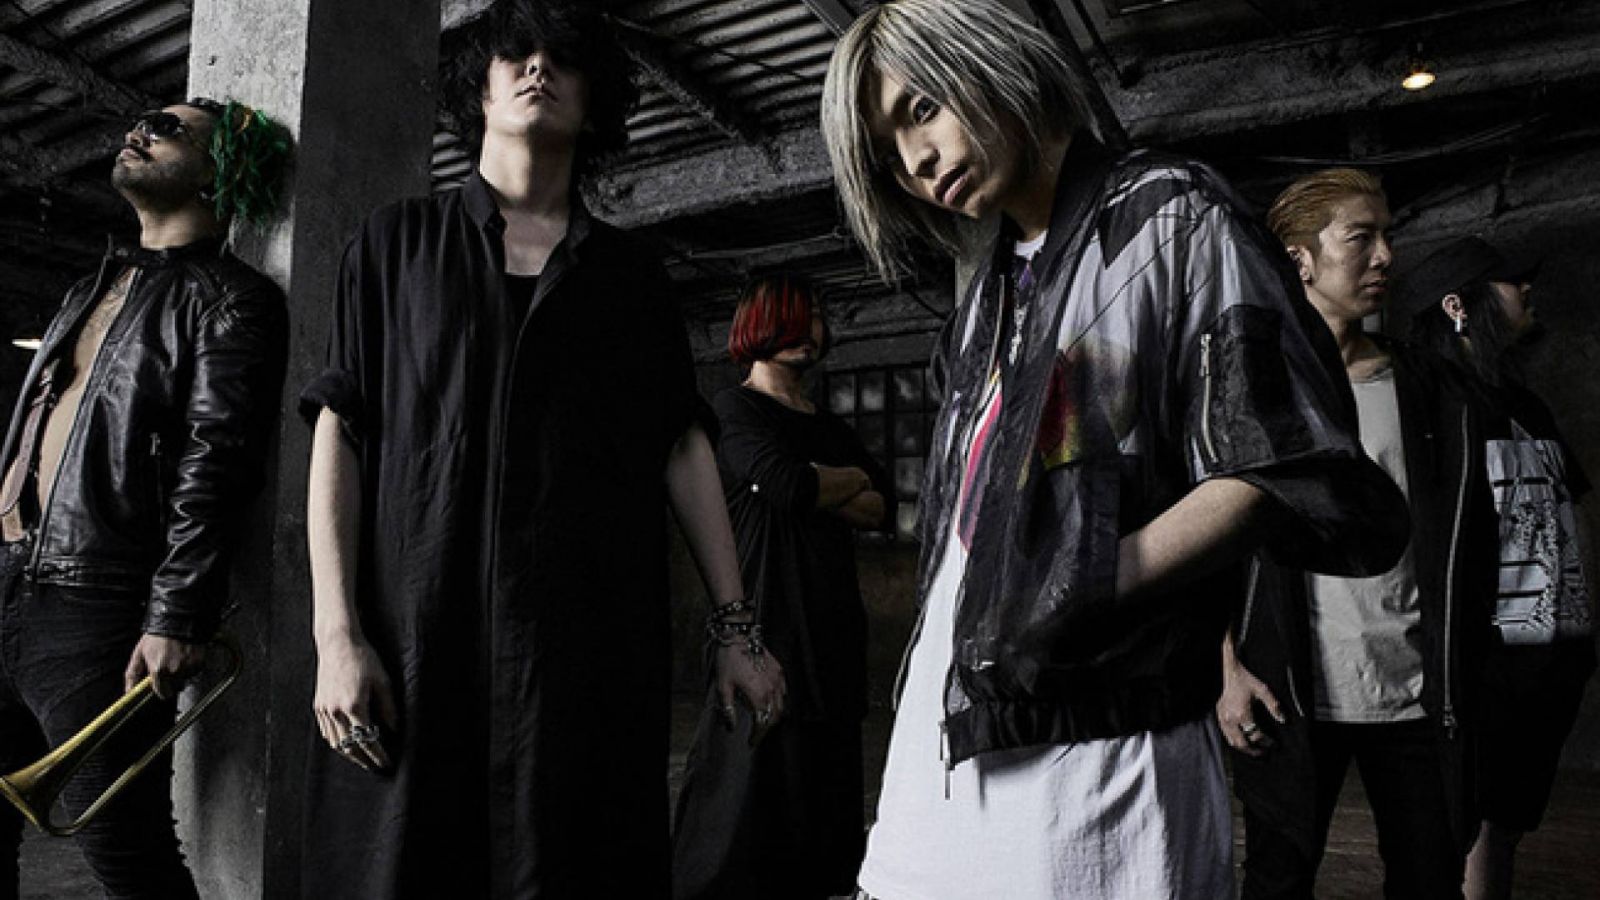 Fear, and Loathing in Las Vegas Bassist Kei Passes Away © Fear, and Loathing in Las Vegas. All rights reserved.